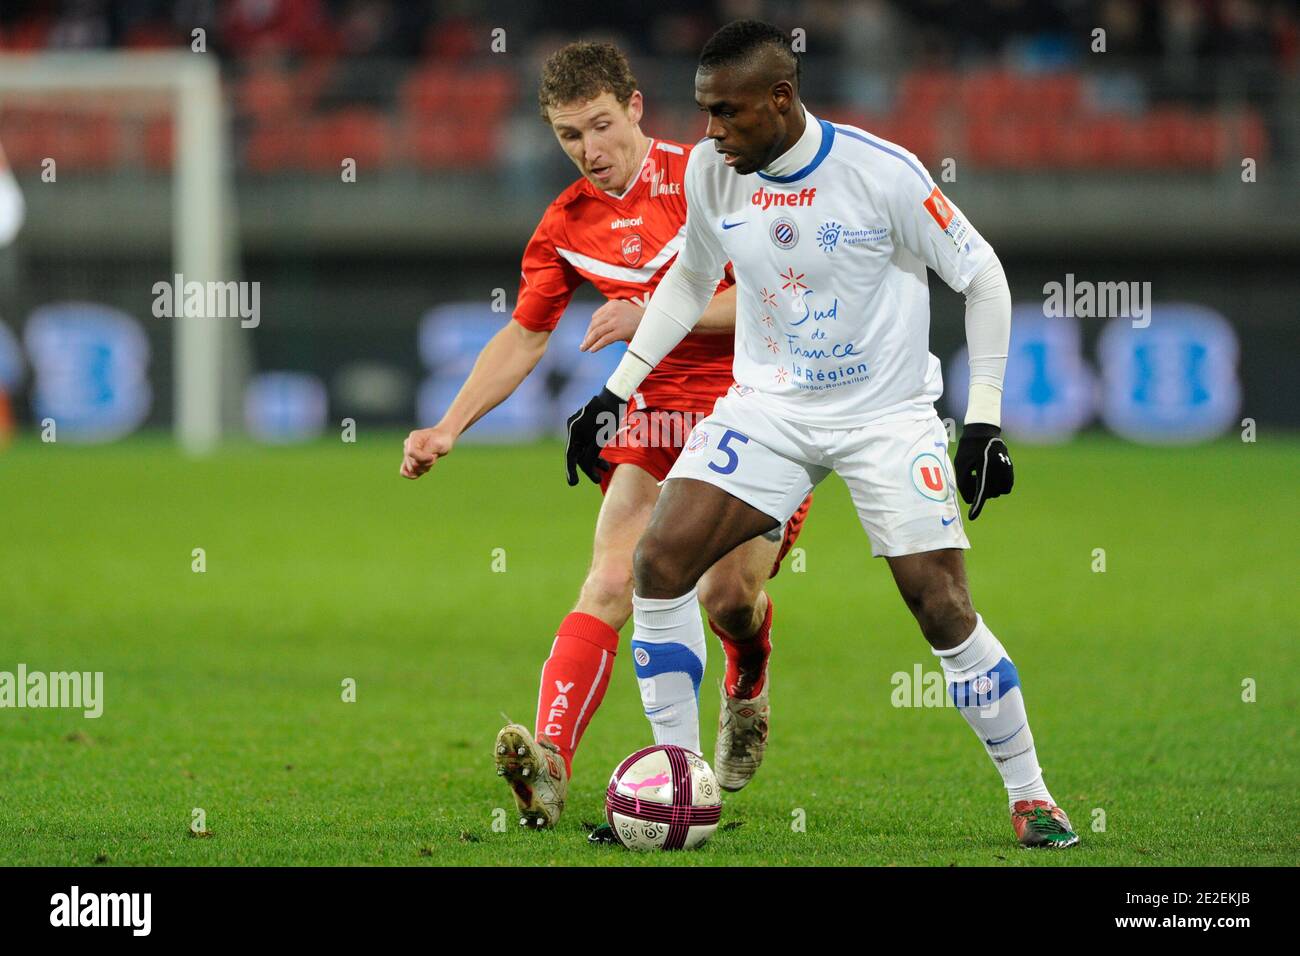 Valenciennes's David Ducourtioux battling Montpellier's Henri Bedimo during the French First League soccer match, Valenciennes vs Montpellier in Valenciennes, France, on December 10th, 2011. Valenciennes won 1-0. Photo by Henri Szwarc/ABACAPRESS.COM Stock Photo